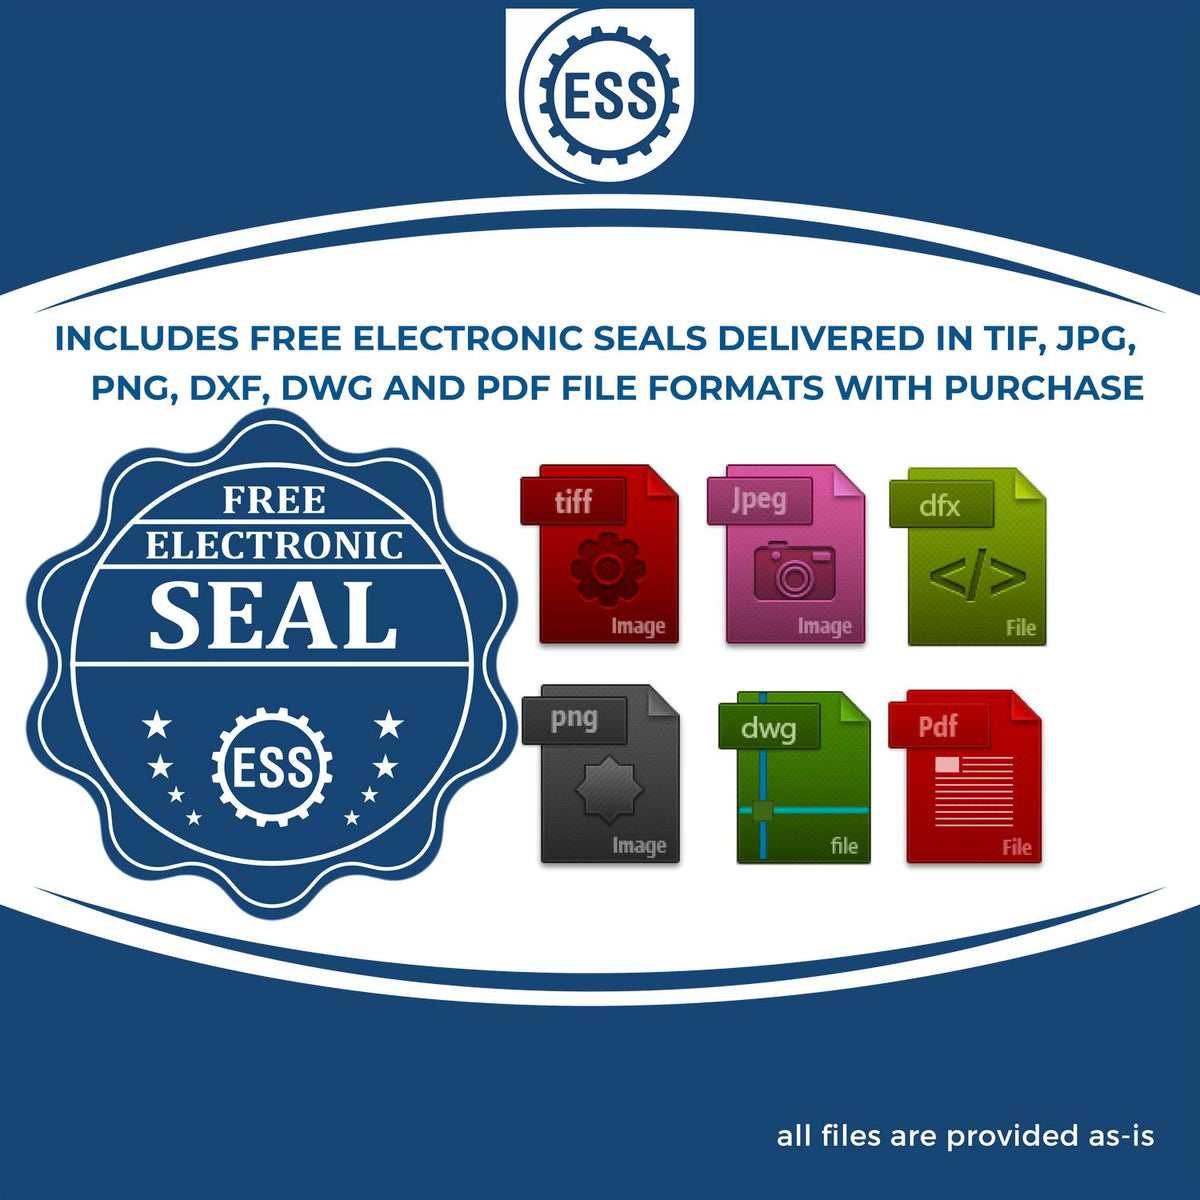 An infographic for the free electronic seal for the Premium MaxLight Pre-Inked Maine Landscape Architectural Stamp illustrating the different file type icons such as DXF, DWG, TIF, JPG and PNG.